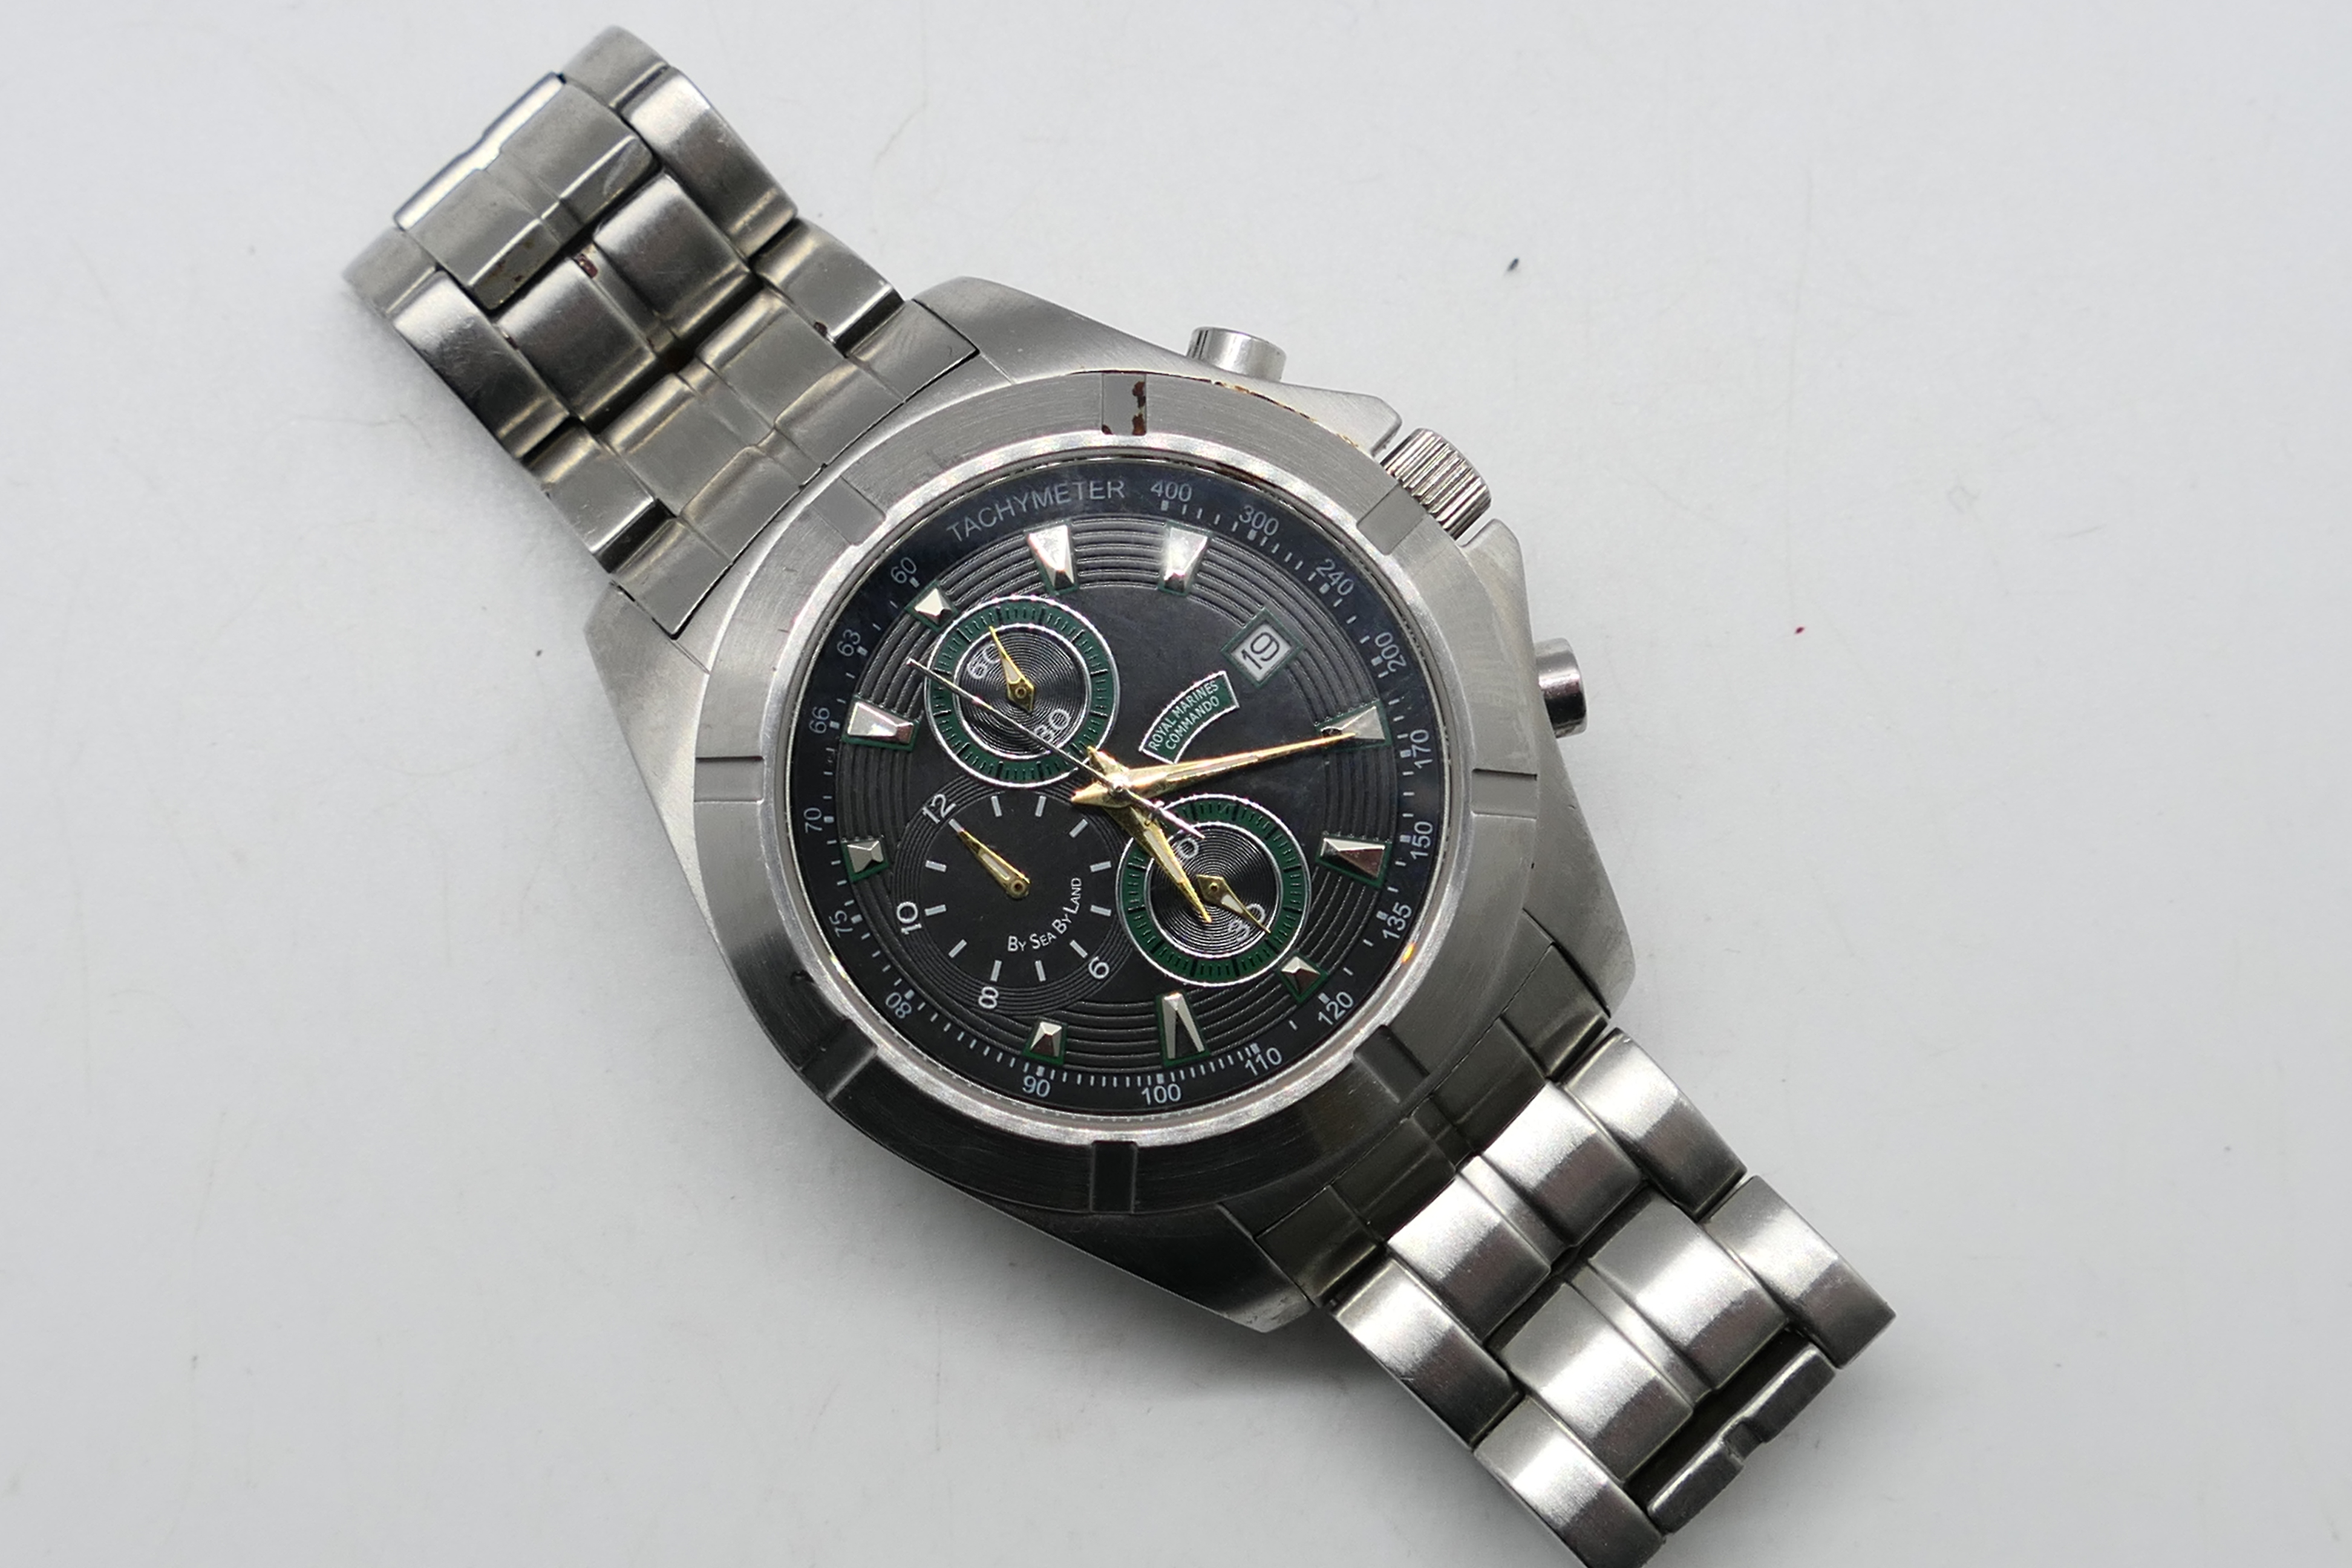 A Royal Marines Commando stainless steel wrist watch. - Image 2 of 5